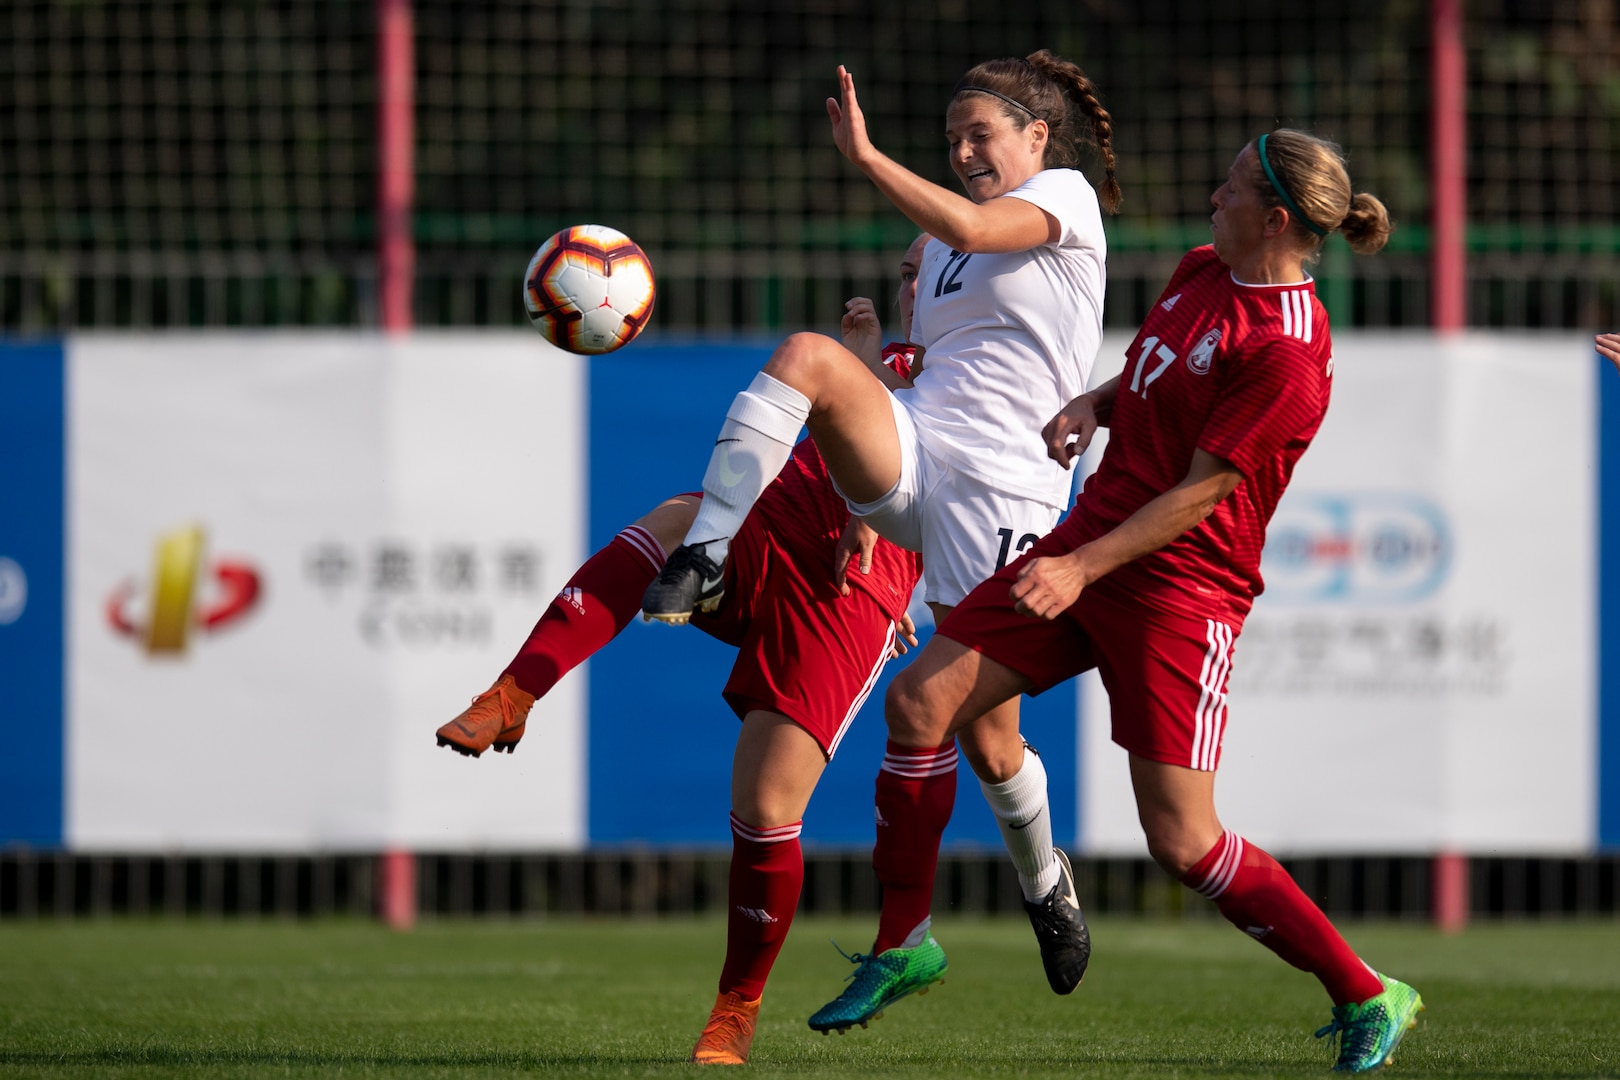 U.S. Air Force 1st Lt. Meredith Reisinger, center, of the U.S. Armed Forces Women’s Soccer Team battles for a ball during a preliminary game with Germany in the 2019 CISM Military World Games in Wuhan, China Oct. 17, 2019. The Council of International Sports for the Military games open Oct. 18, 2019 and close Oct. 28, 2019. (DoD photo by EJ Hersom)